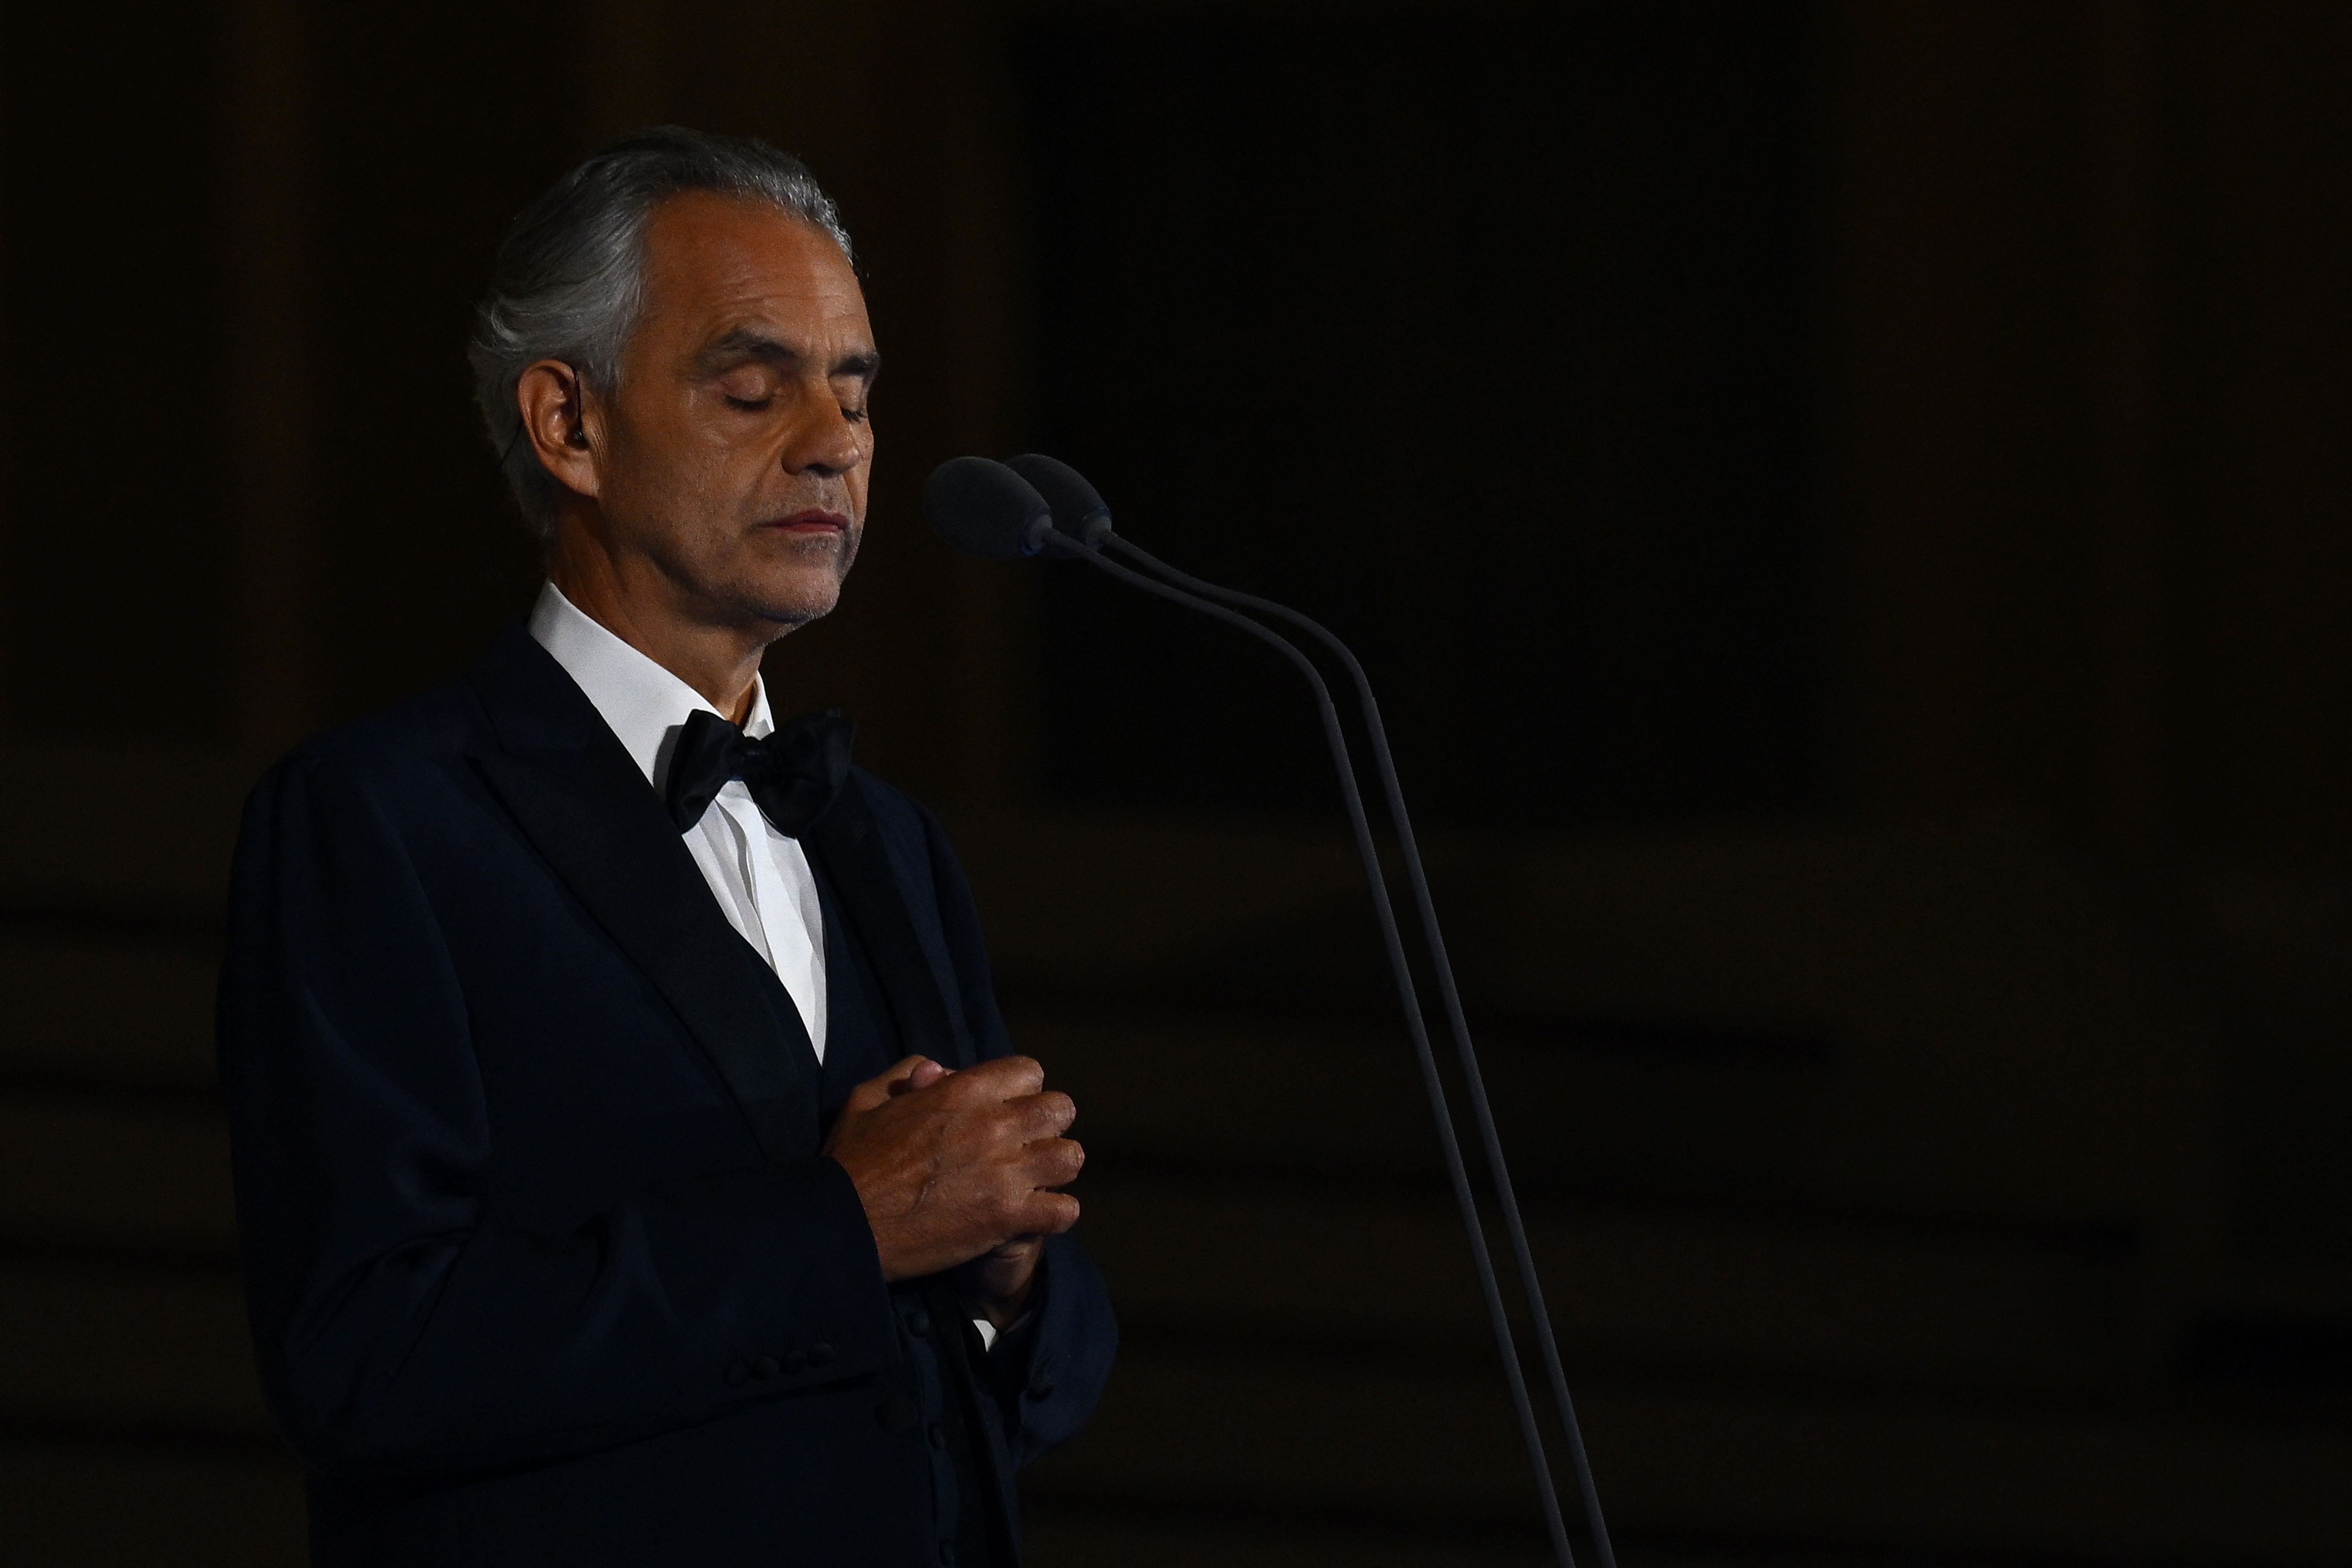 Andrea Bocelli on singing with family at Christmas: 'My voice is